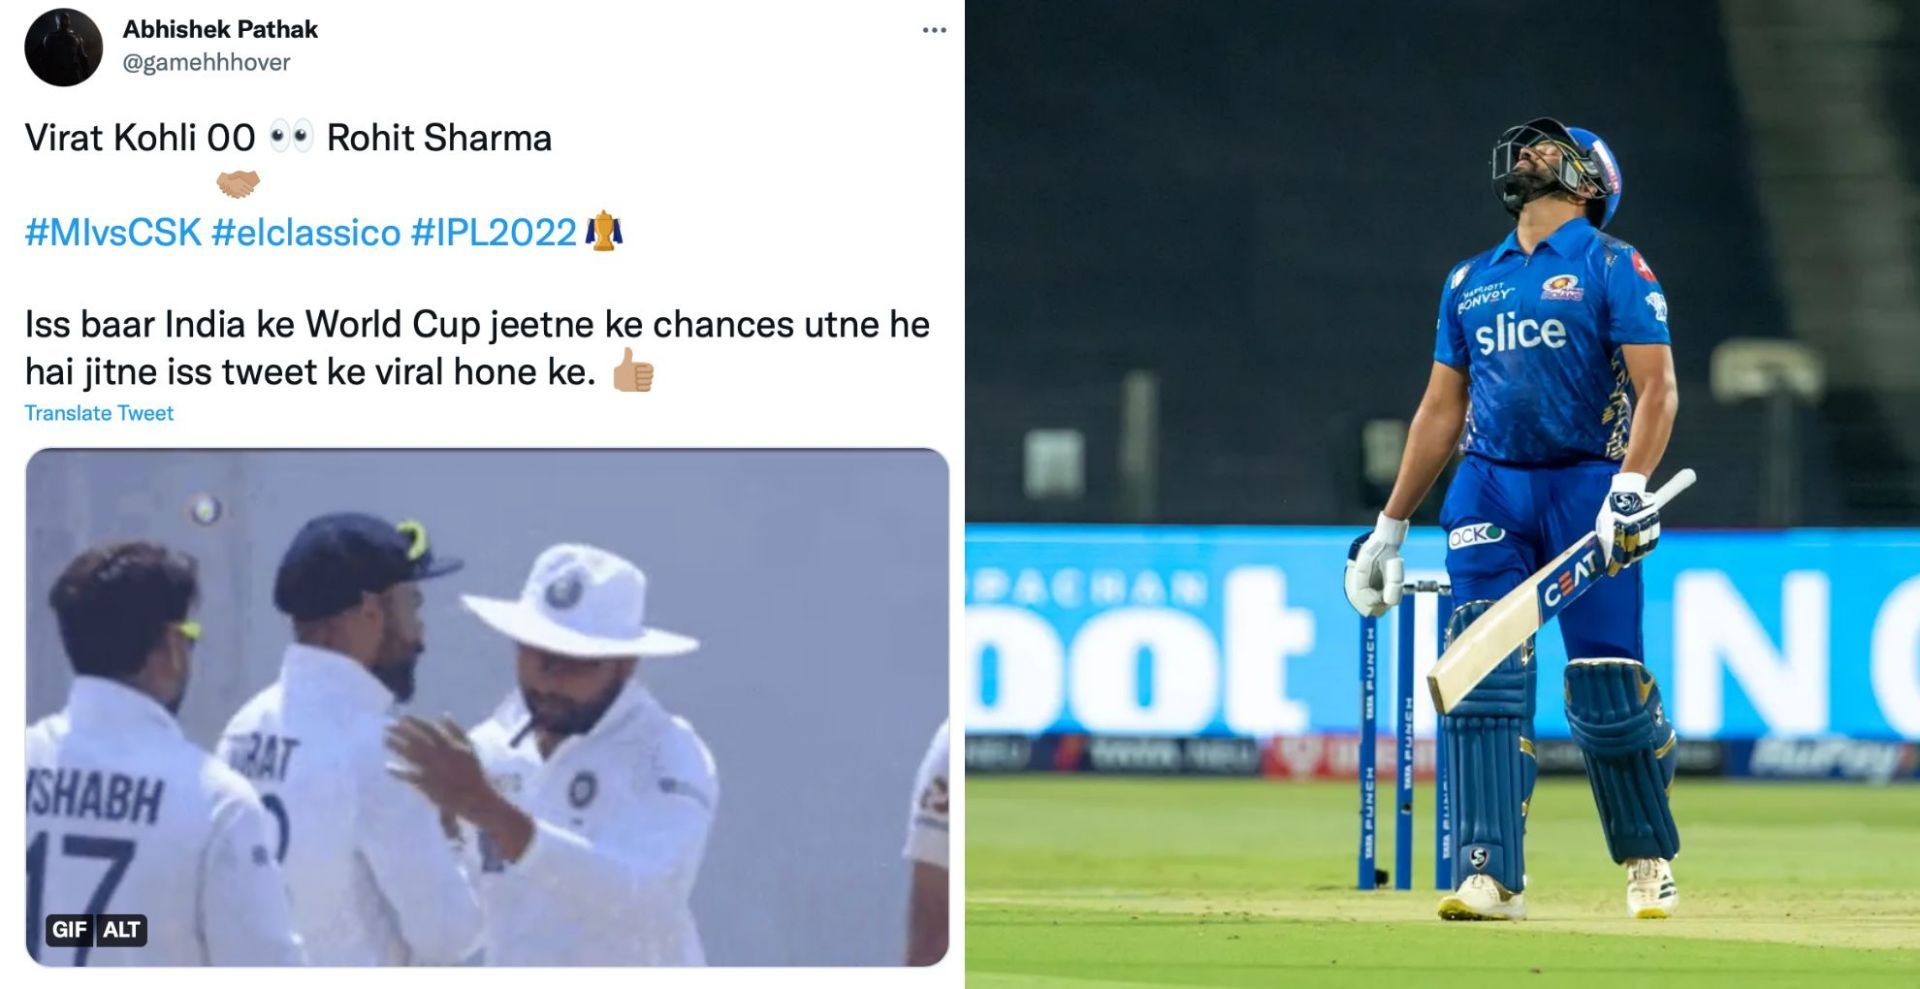 Rohit Sharma bagged a duck against CSK (Credit: Twitter)